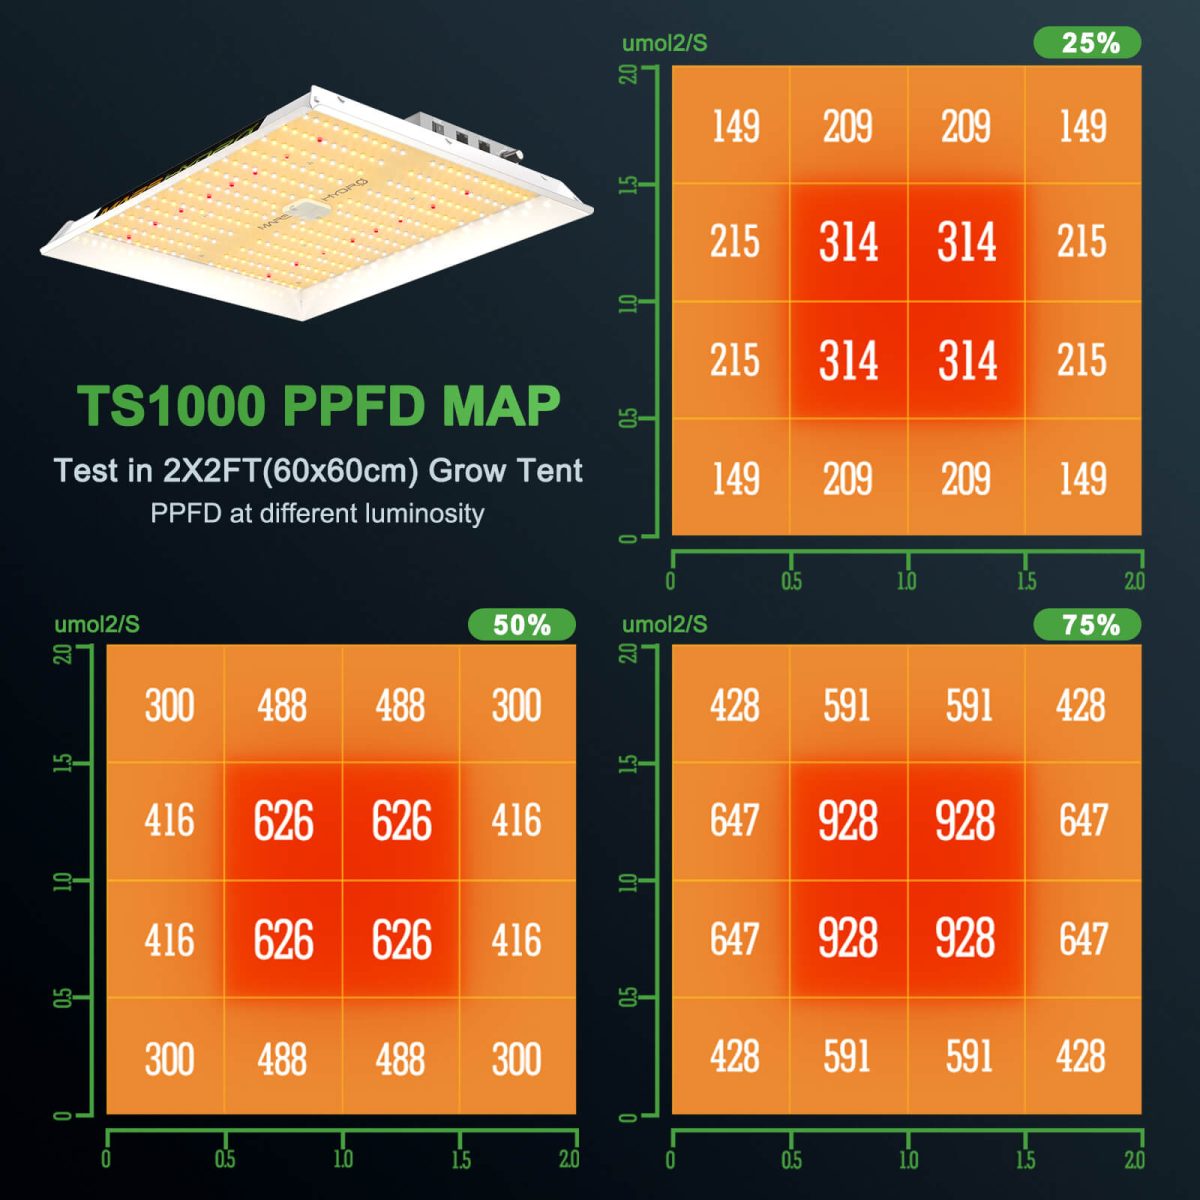 High PPFD map of TS 1000 led grow light at different luminosity 25%, 50% 75% power